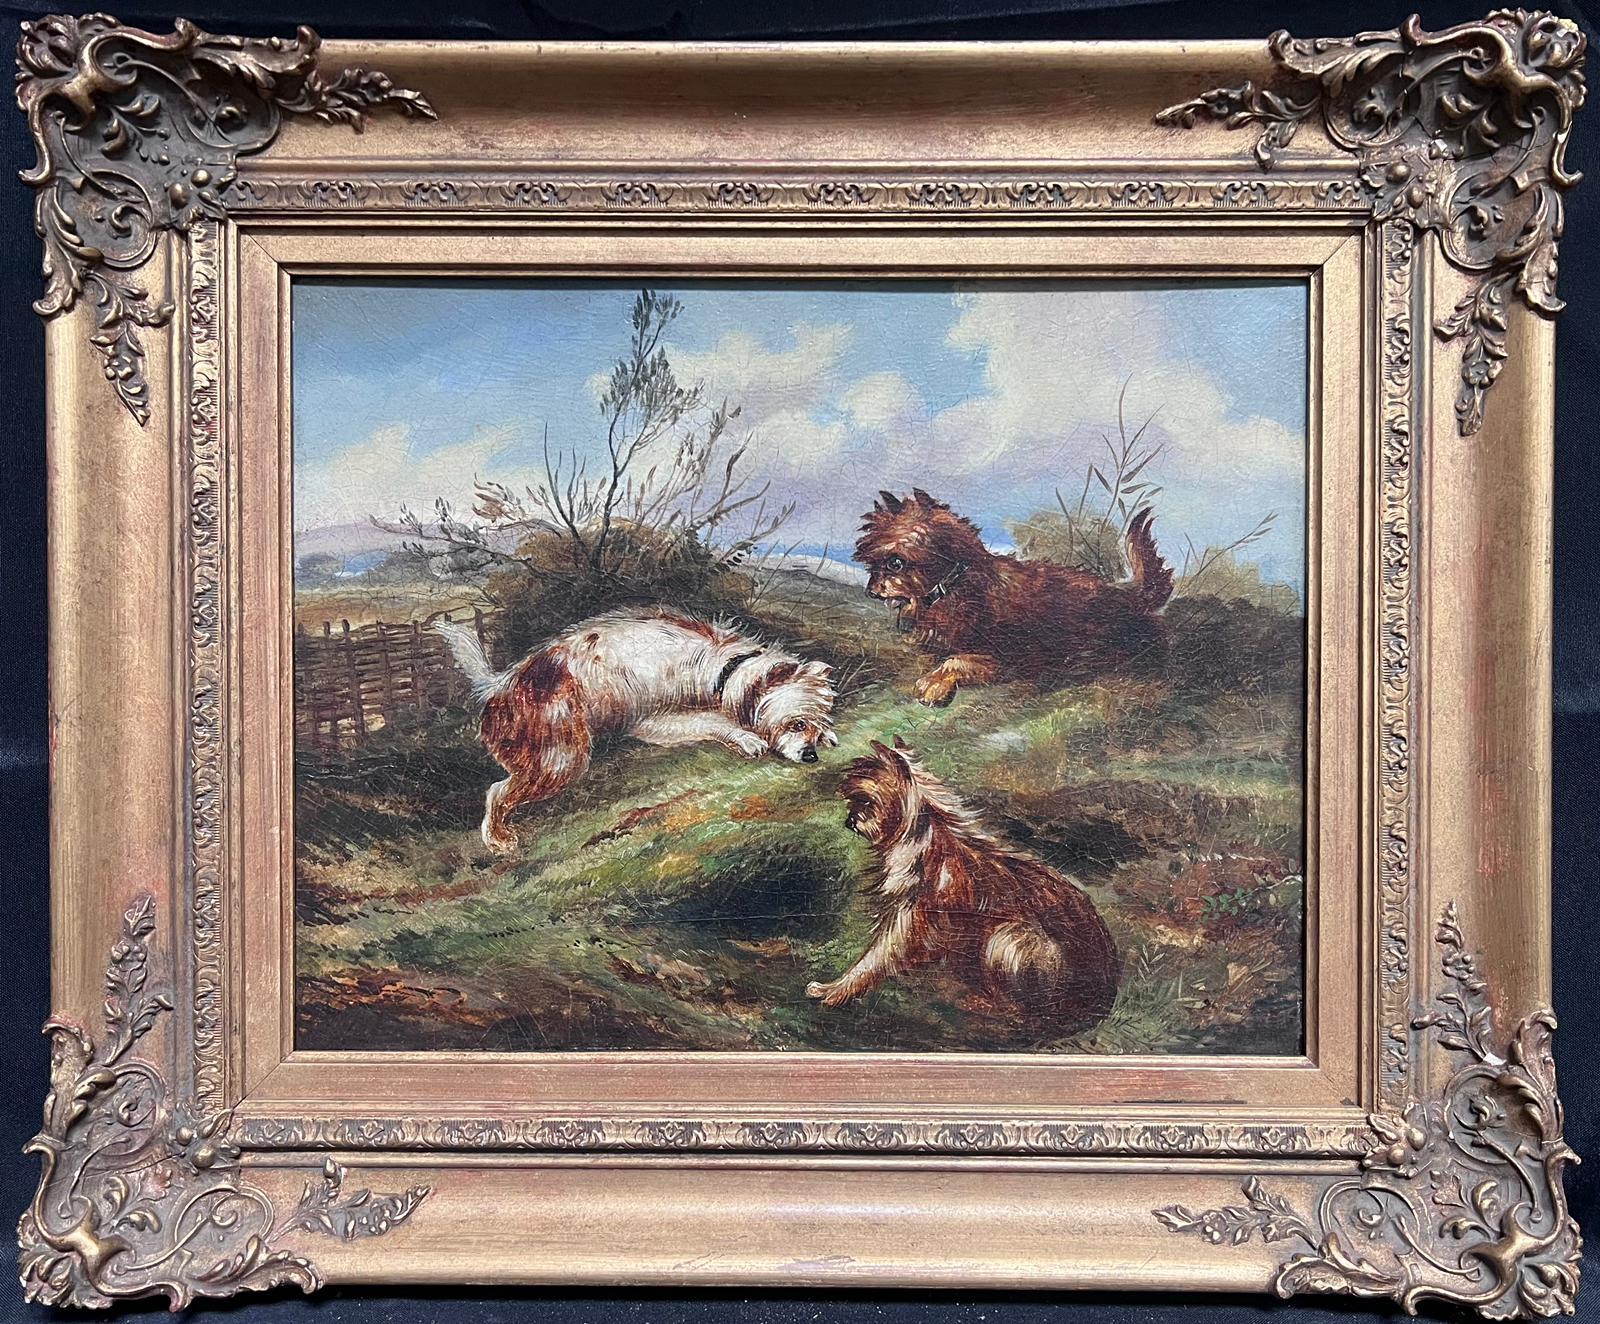 Circle of George Armfield (1808-1893) Landscape Painting - Fine Victorian English Oil Painting Three Terrier Dogs by Rabbit Hole landscape